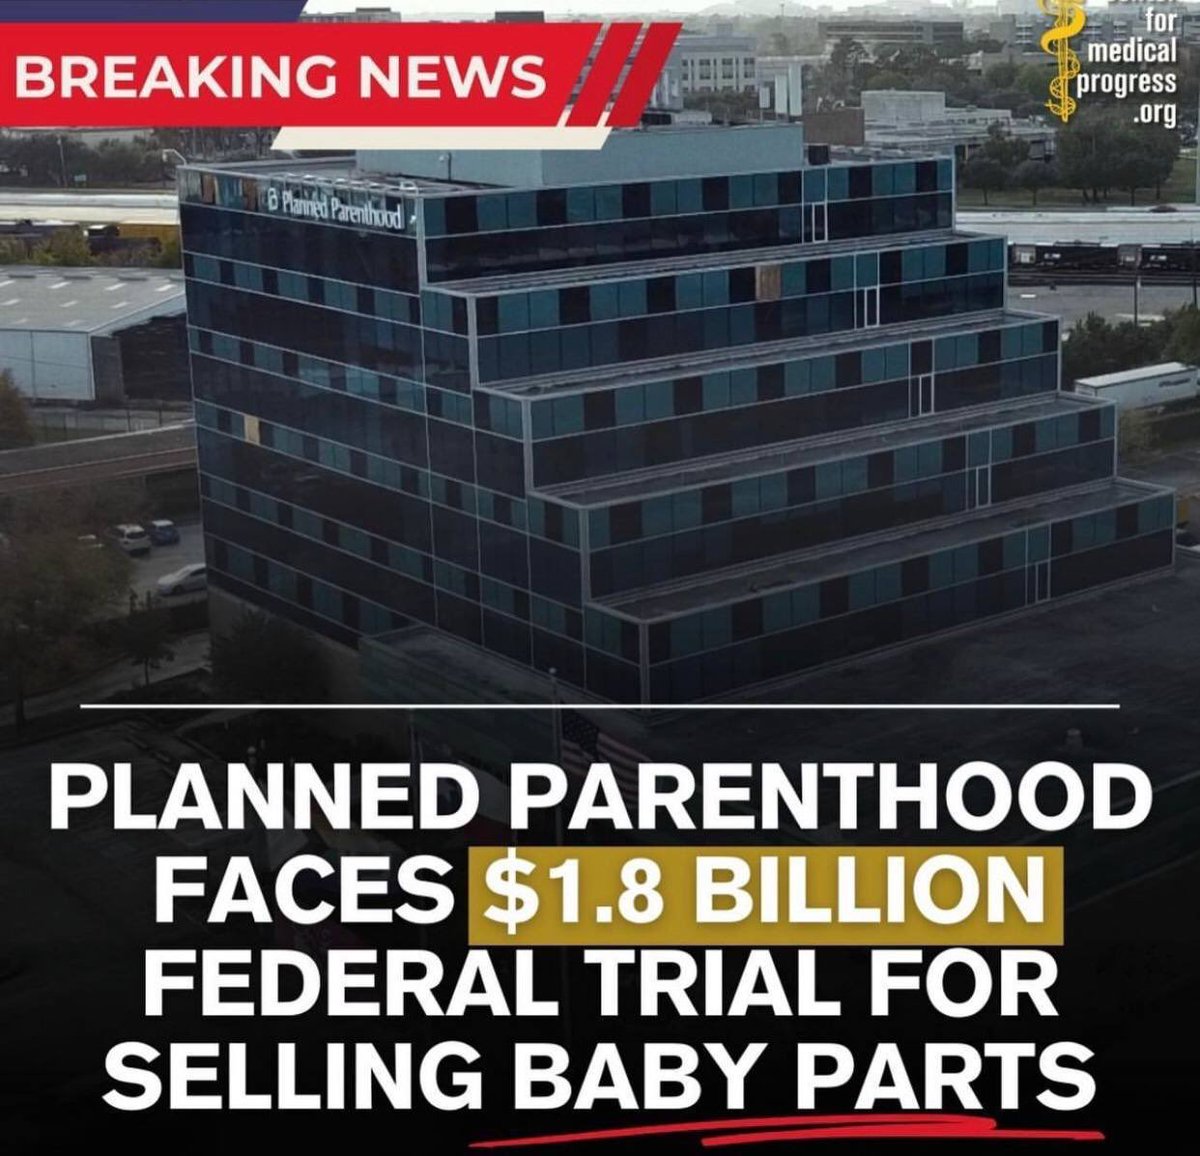 What do you know about Planned Parenthood?